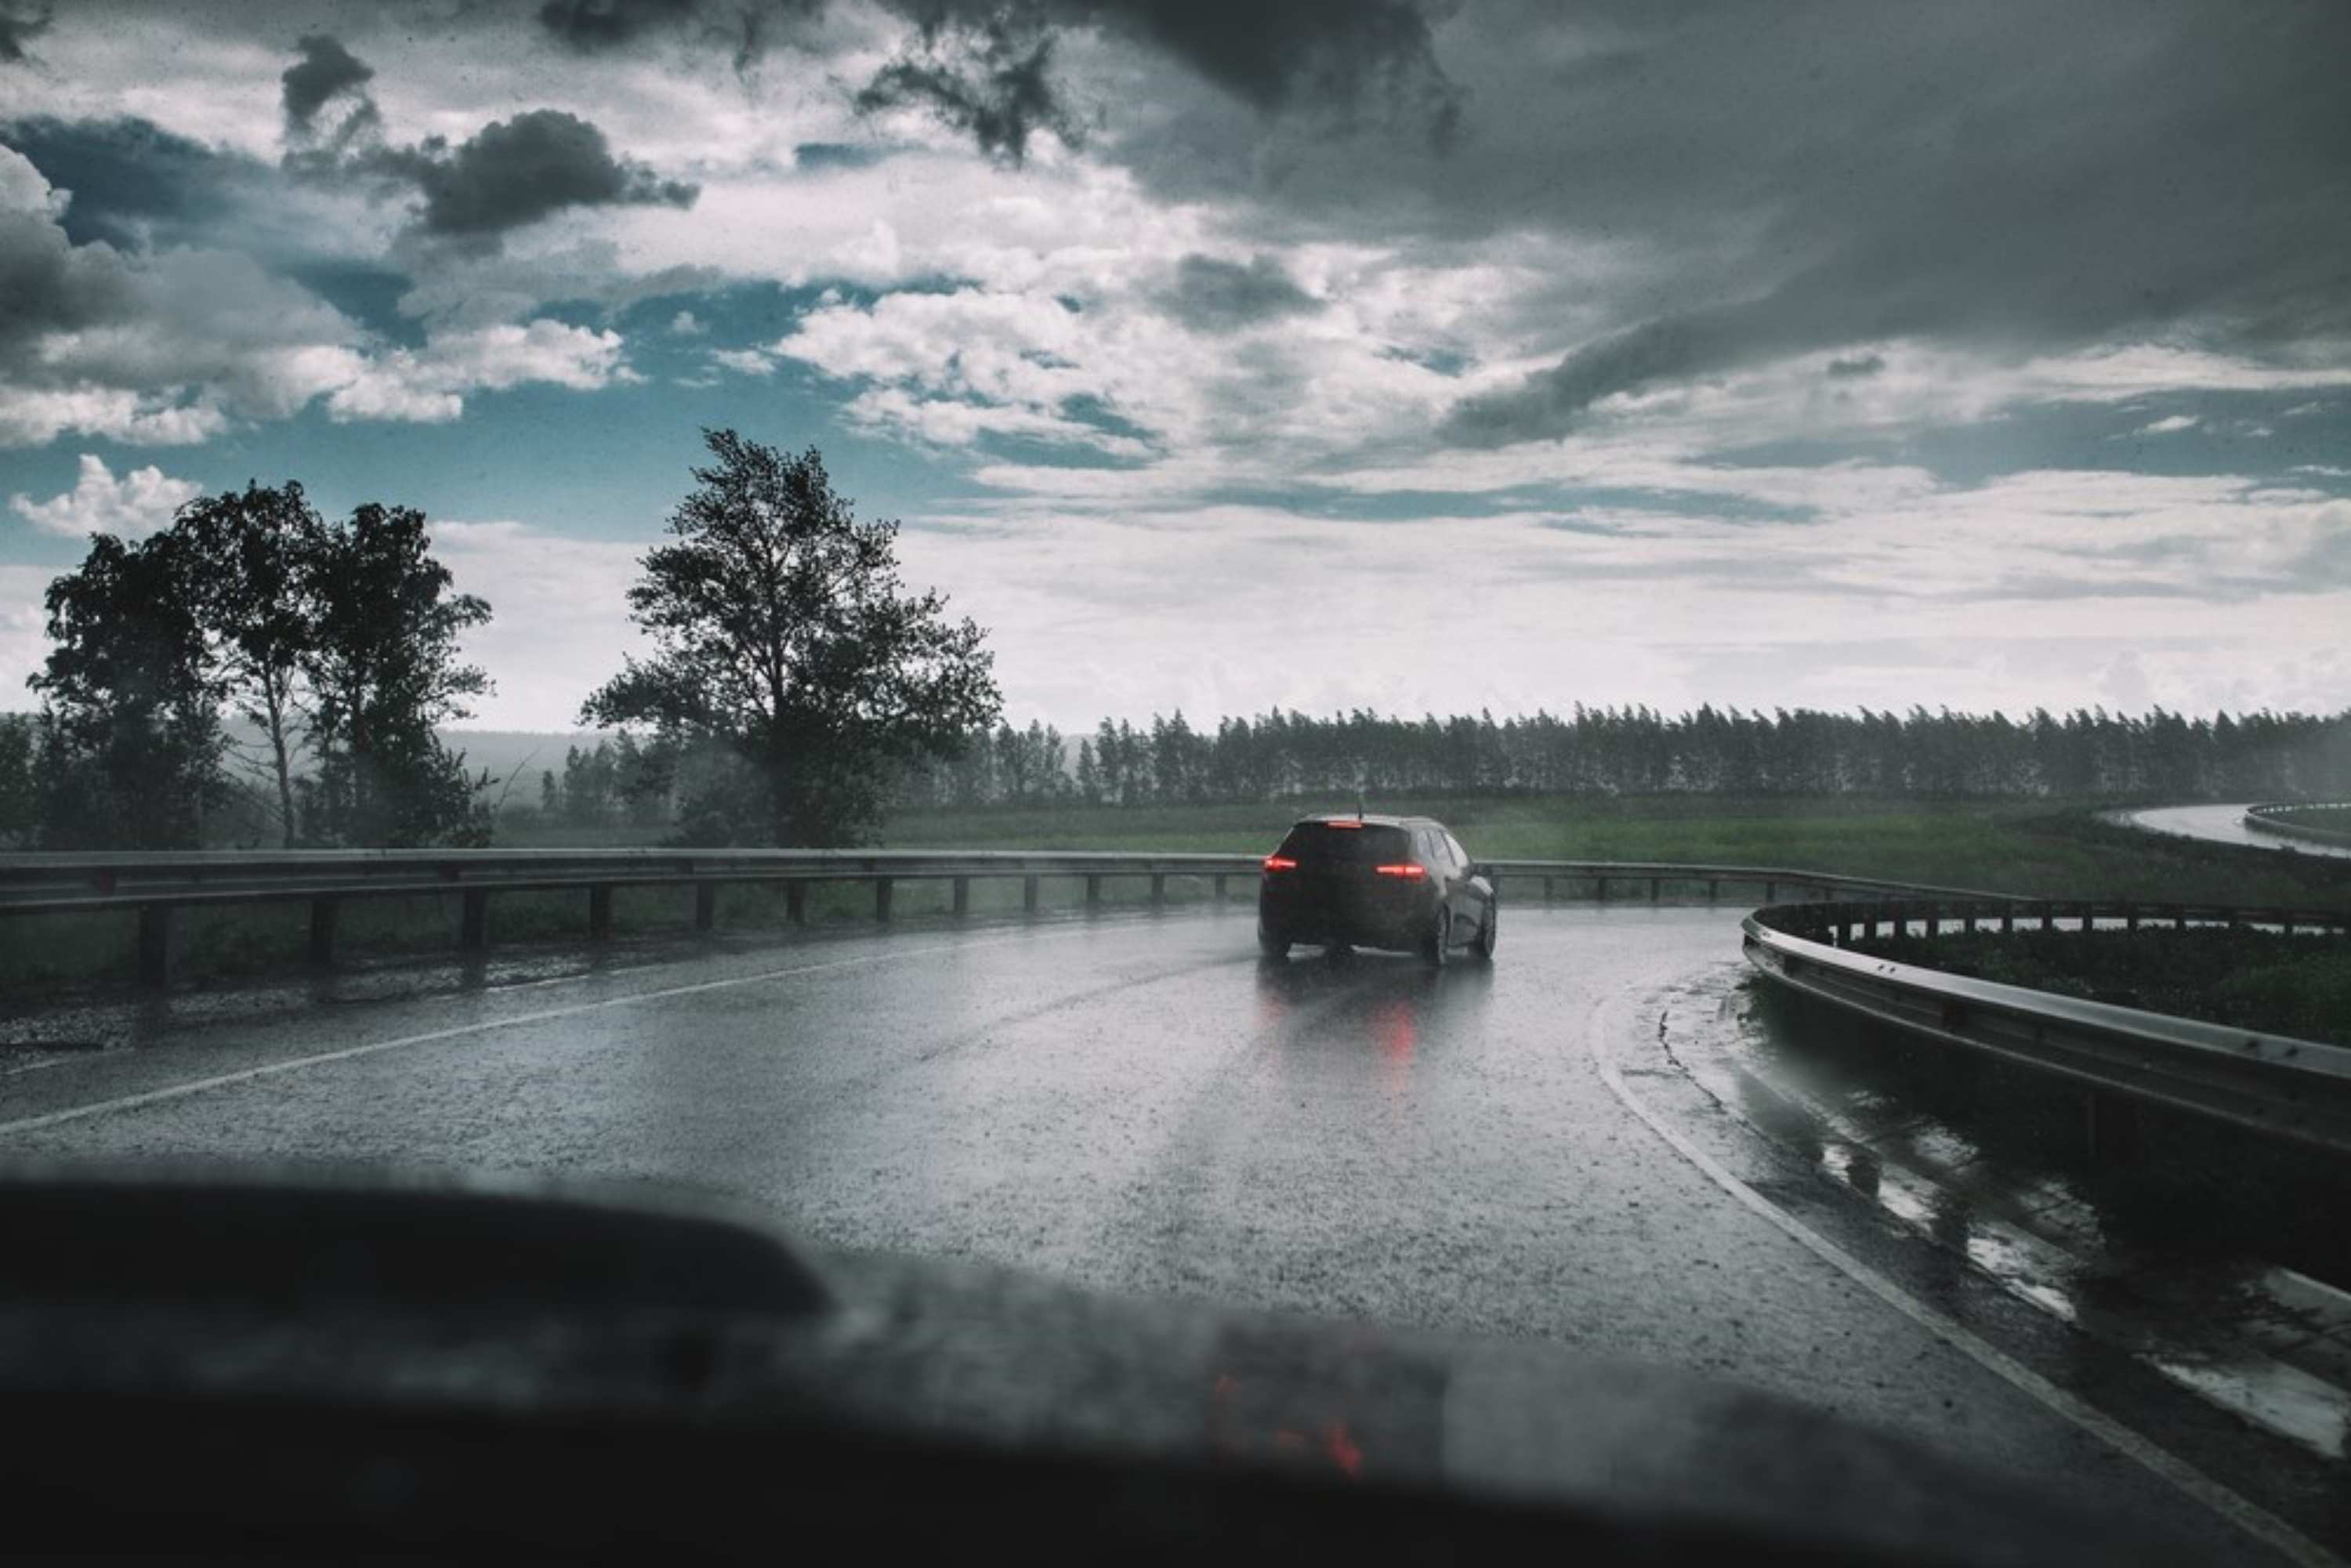 Preparing your car for bad weather